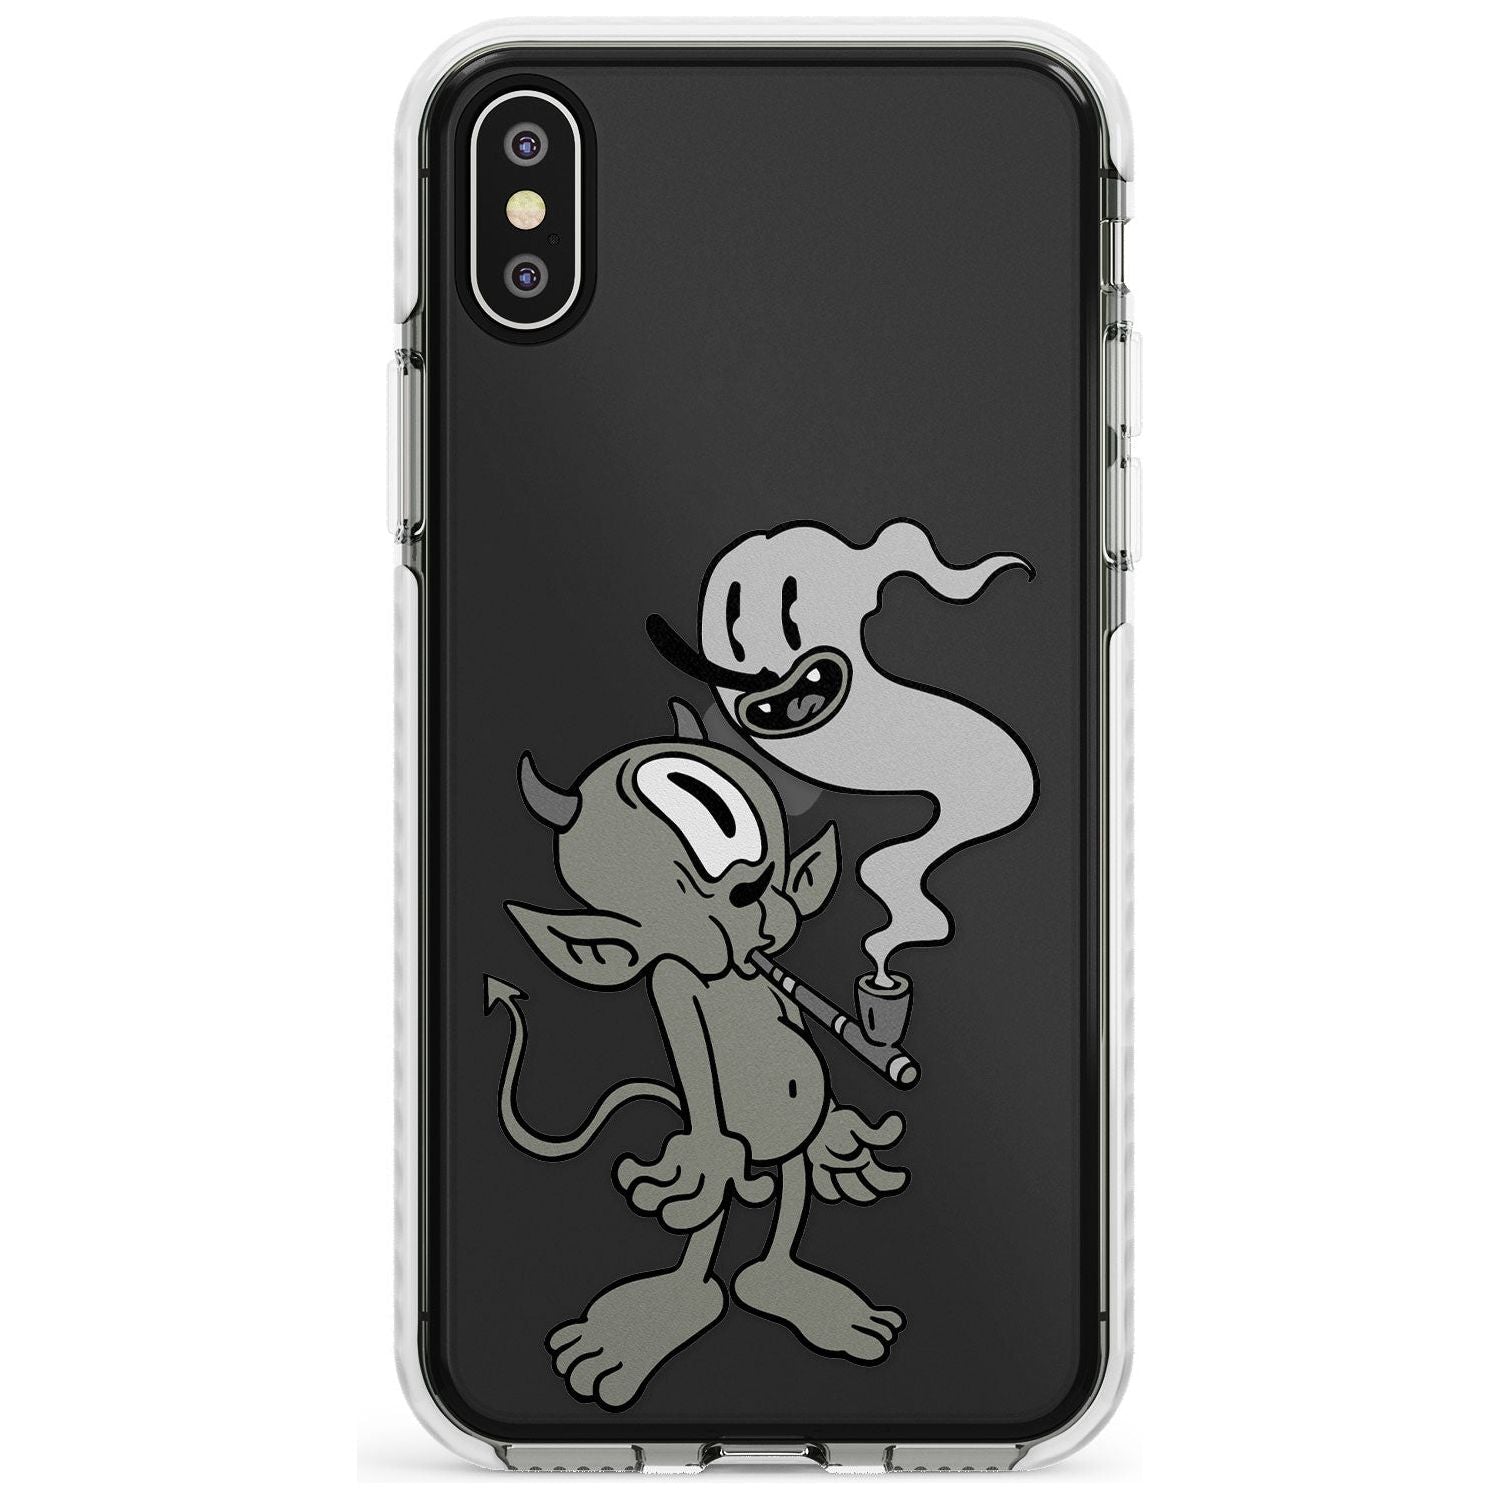 Pipe Goblin Impact Phone Case for iPhone X XS Max XR